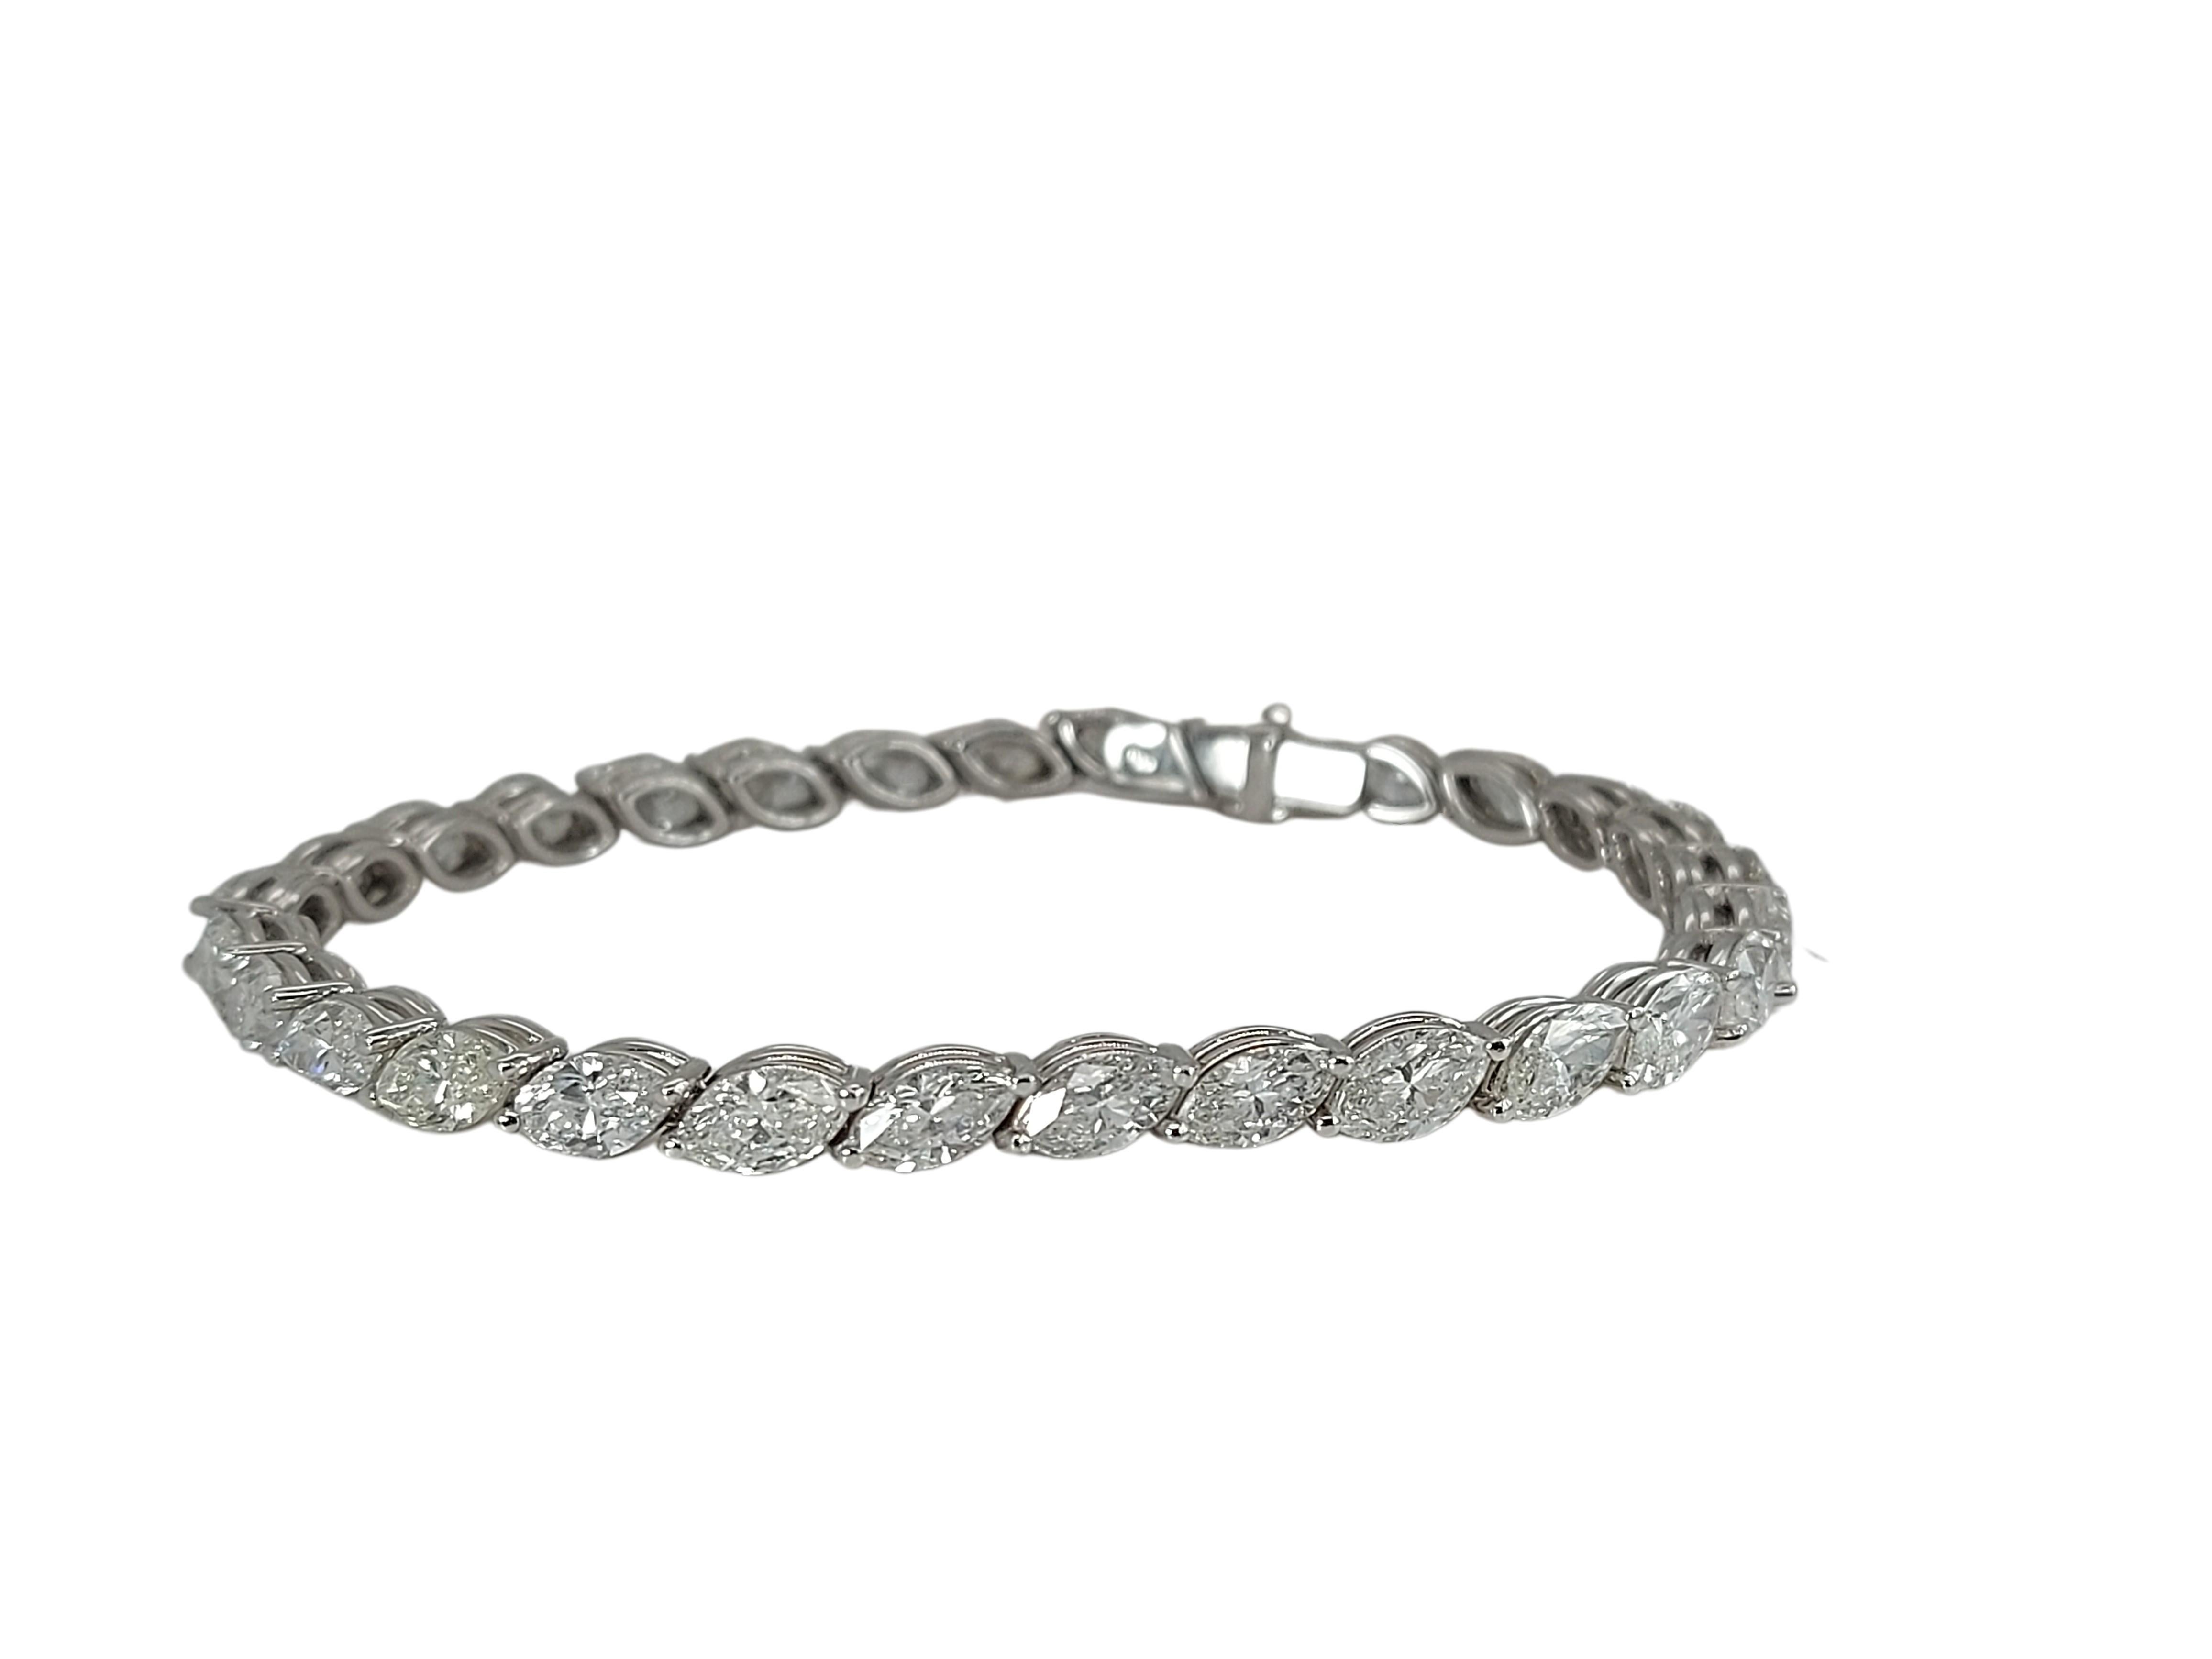 Gorgeous Tennis Diamond Bracelet With 29 Marquise Cut Diamonds

Diamonds: 29 Marquise cut diamonds ,11.6 Ct Top Quality

Material: 18kt White Gold

Total weight: 14.1 gram / 0.500 oz / 9.1 dwt

Measurements: Will maximum fit a 16 cm wrist (can be